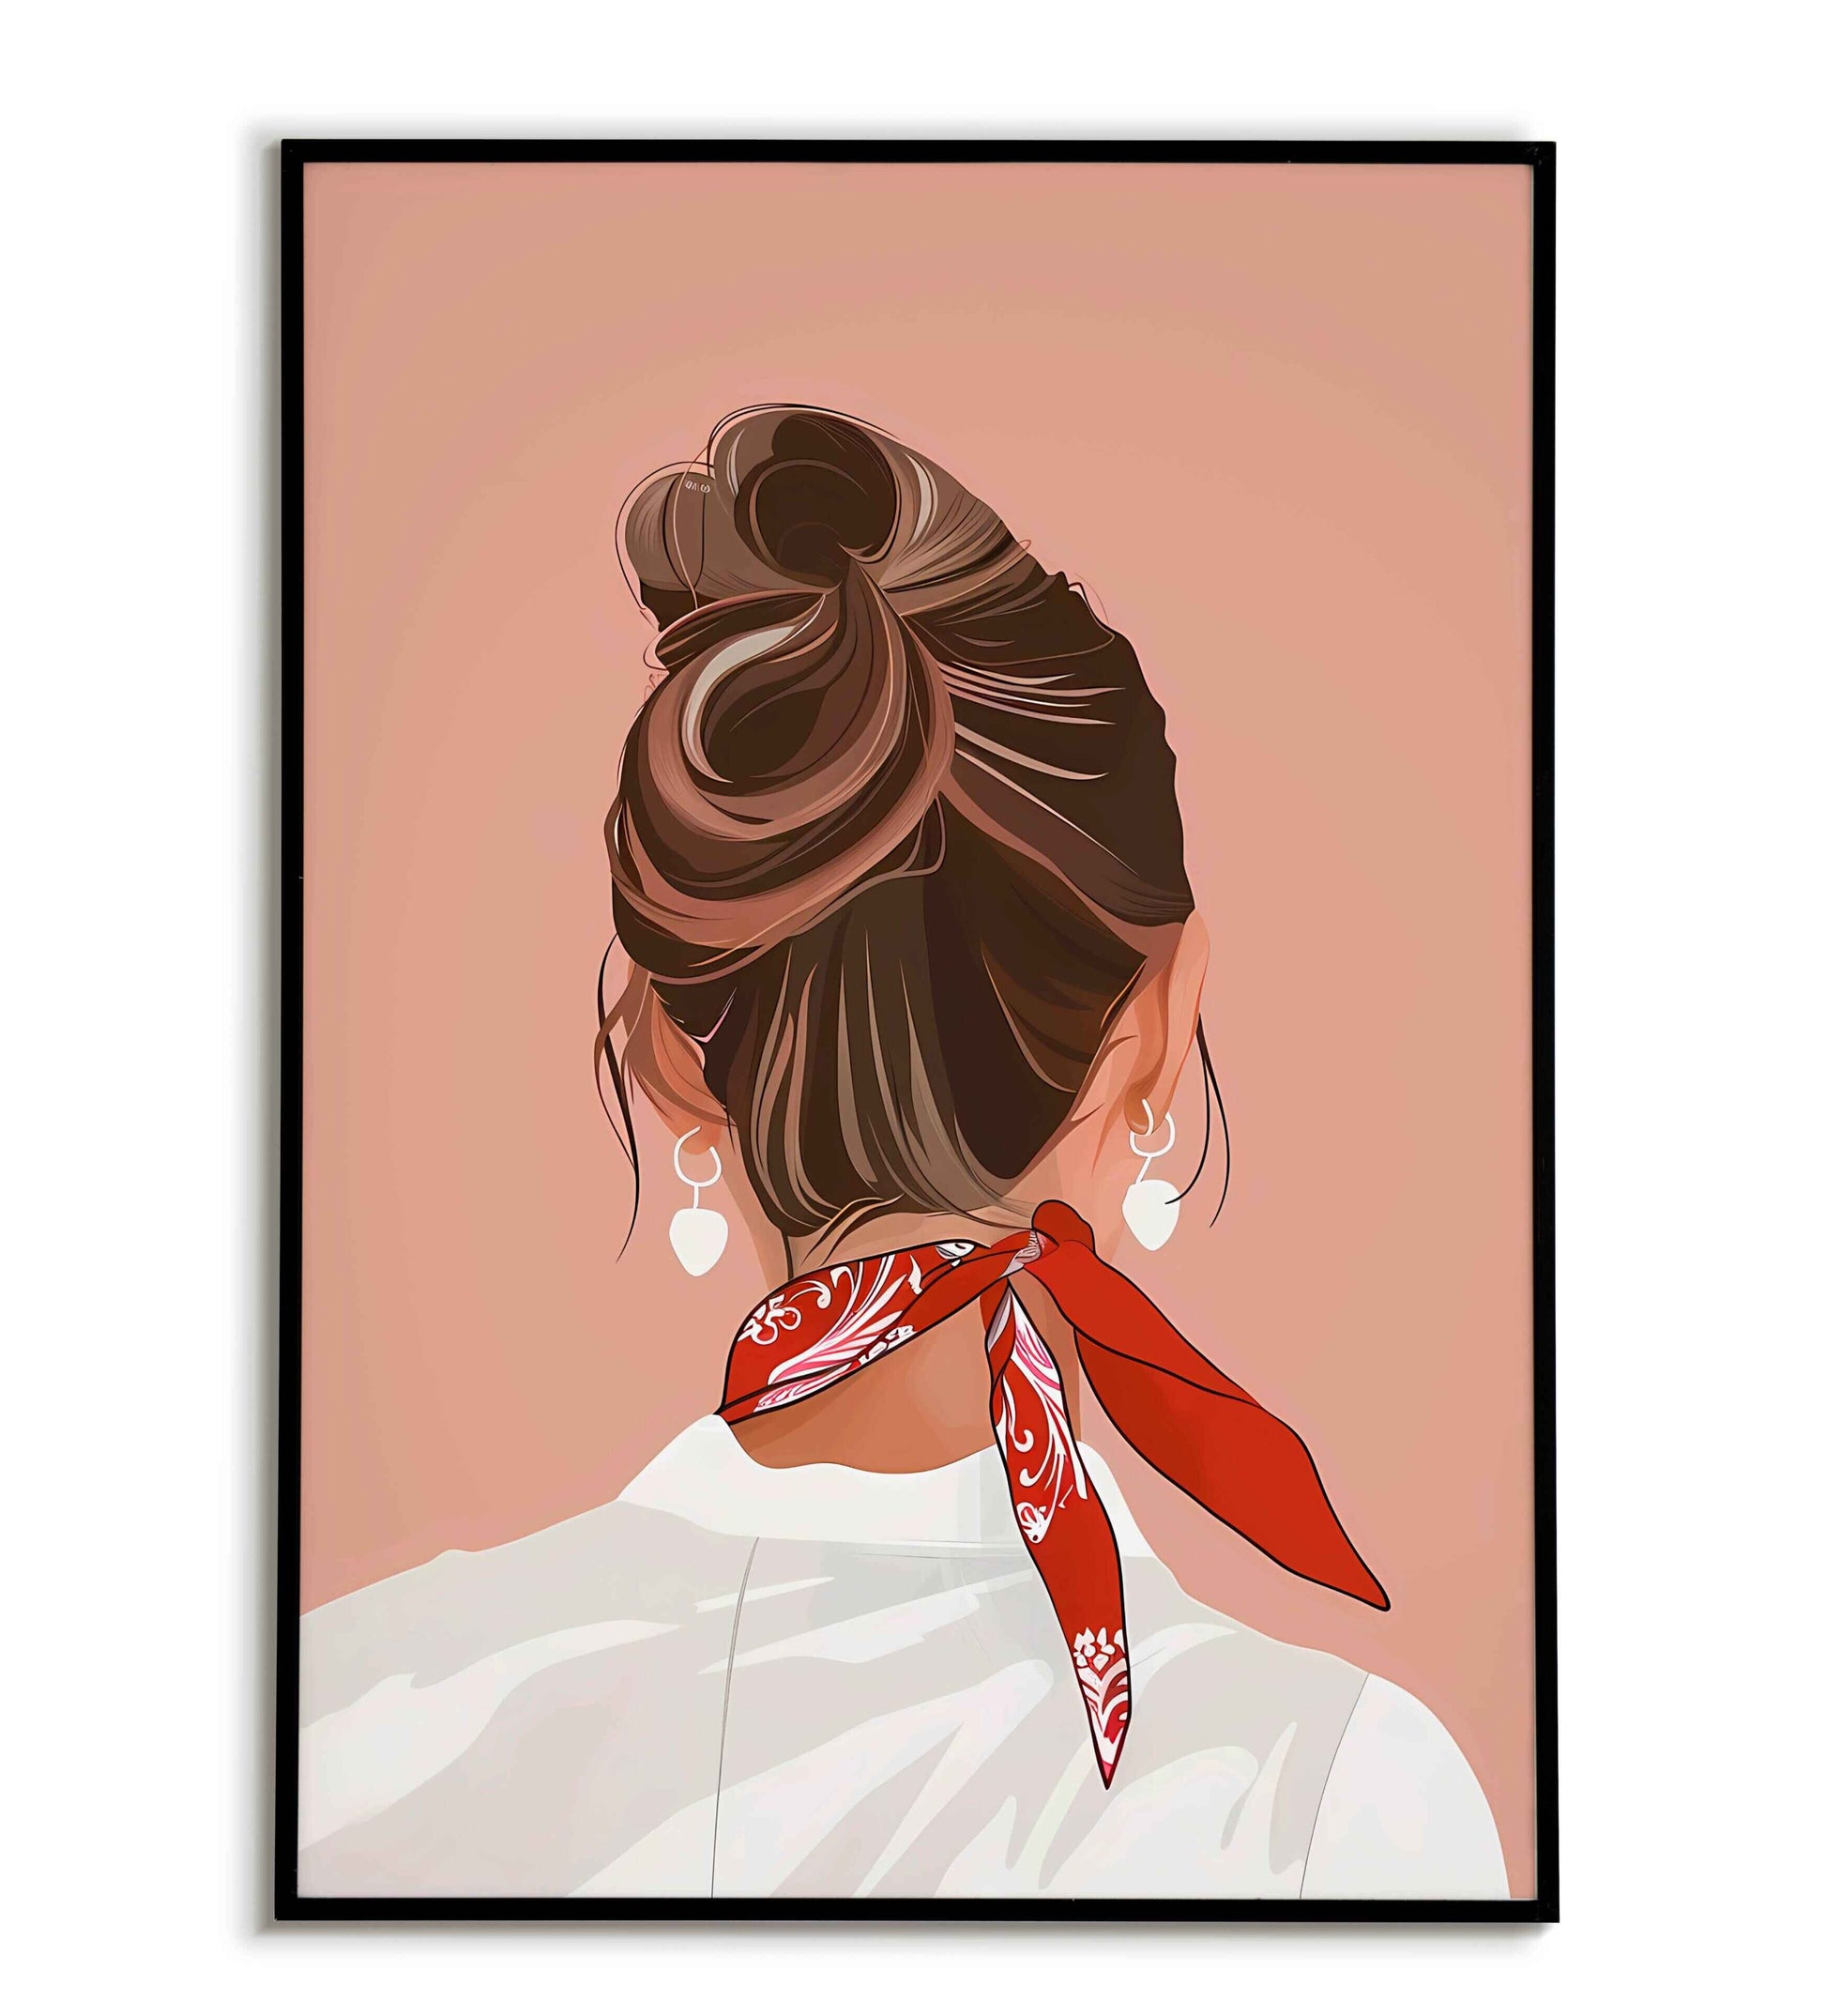 Red Bandana printable poster. Available for purchase as a physical poster or digital download.